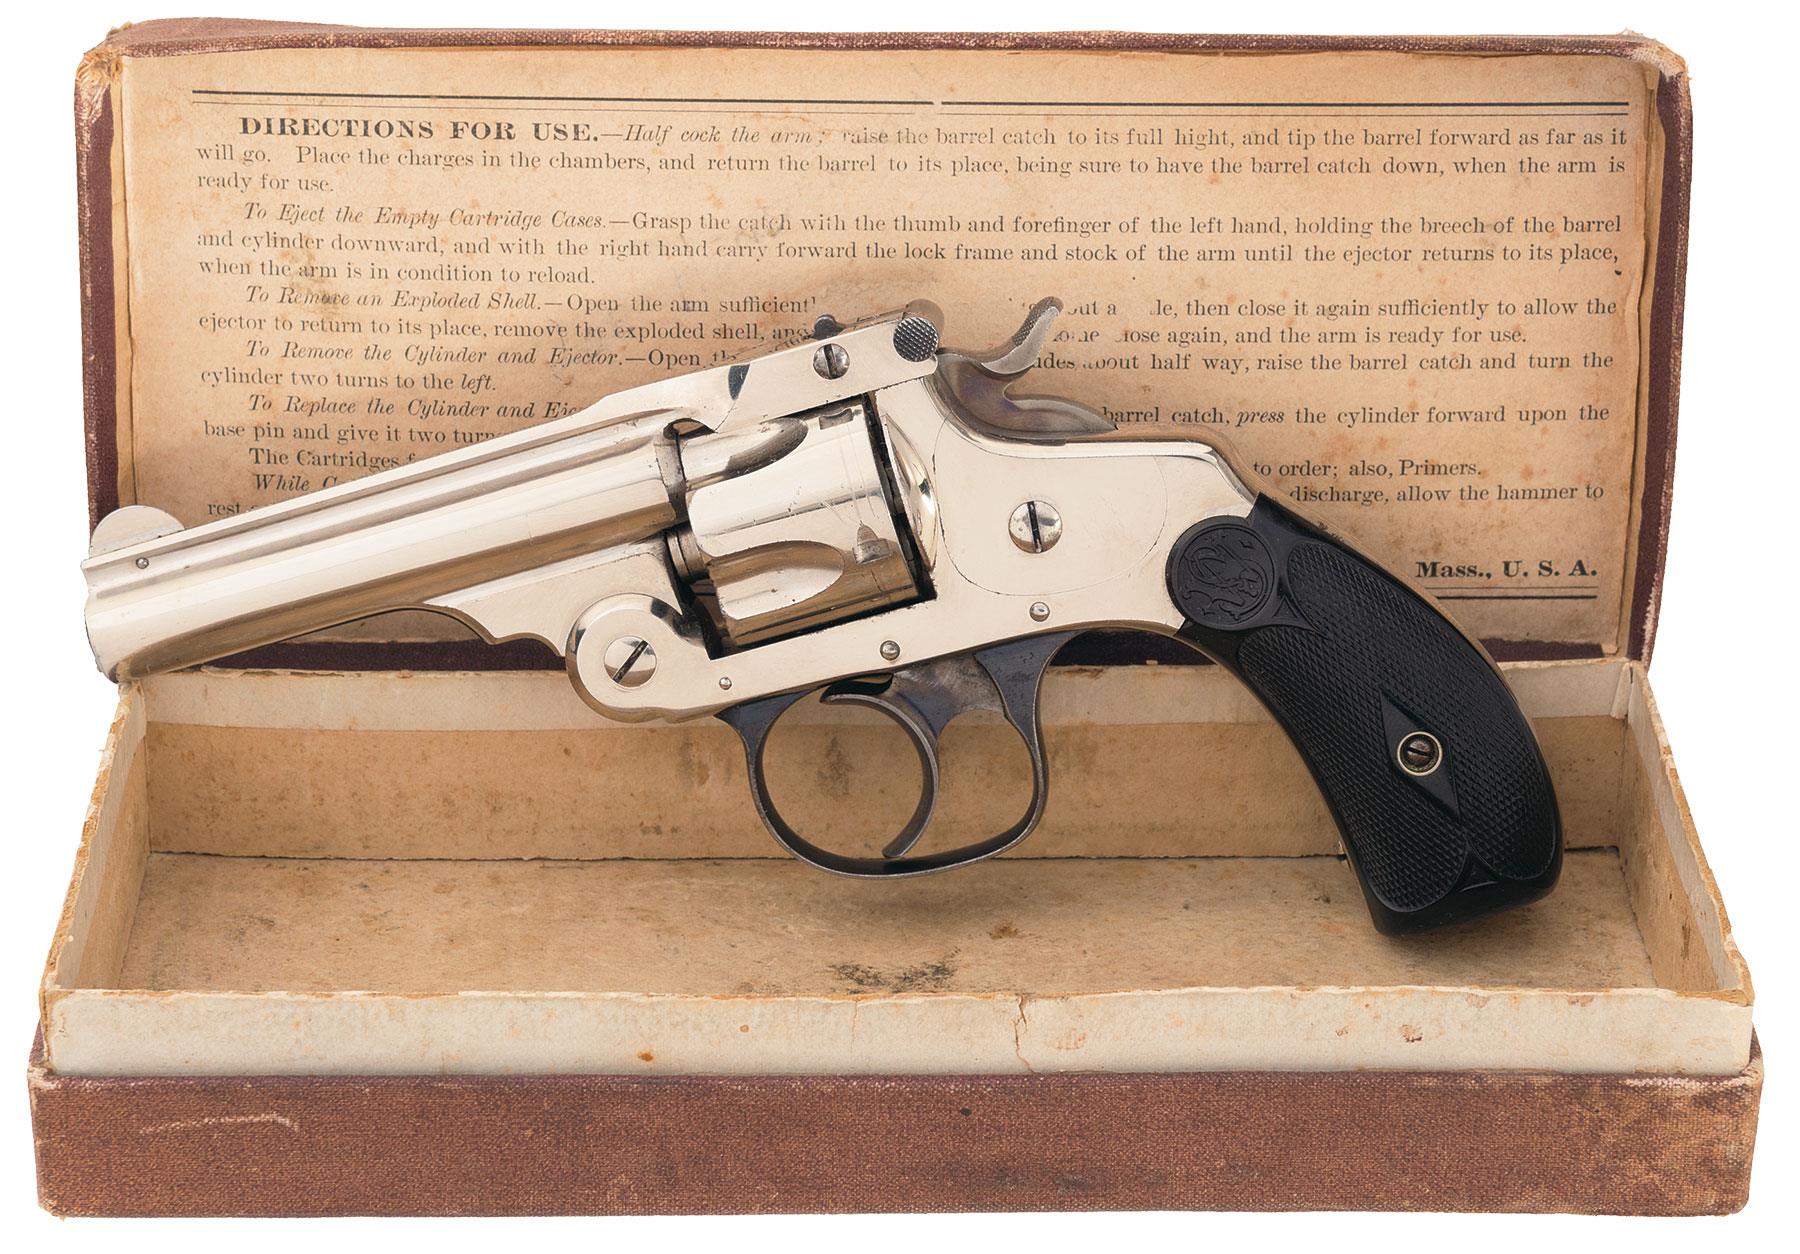 Smith & Wesson 4th Model .32 Double Action Revolver